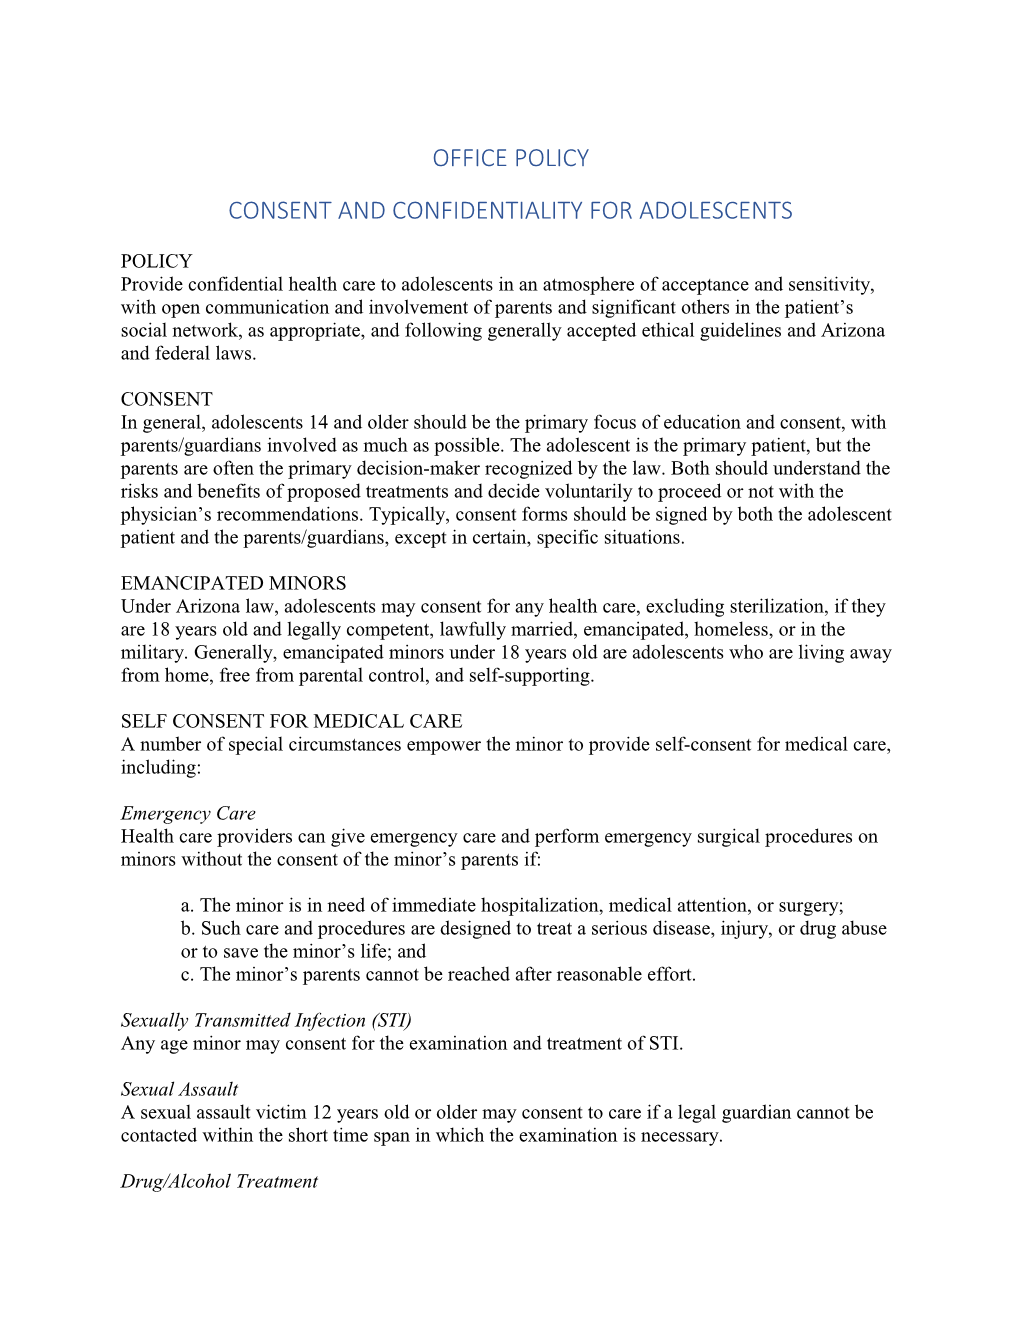 Consent and Confidentiality for Adolescents